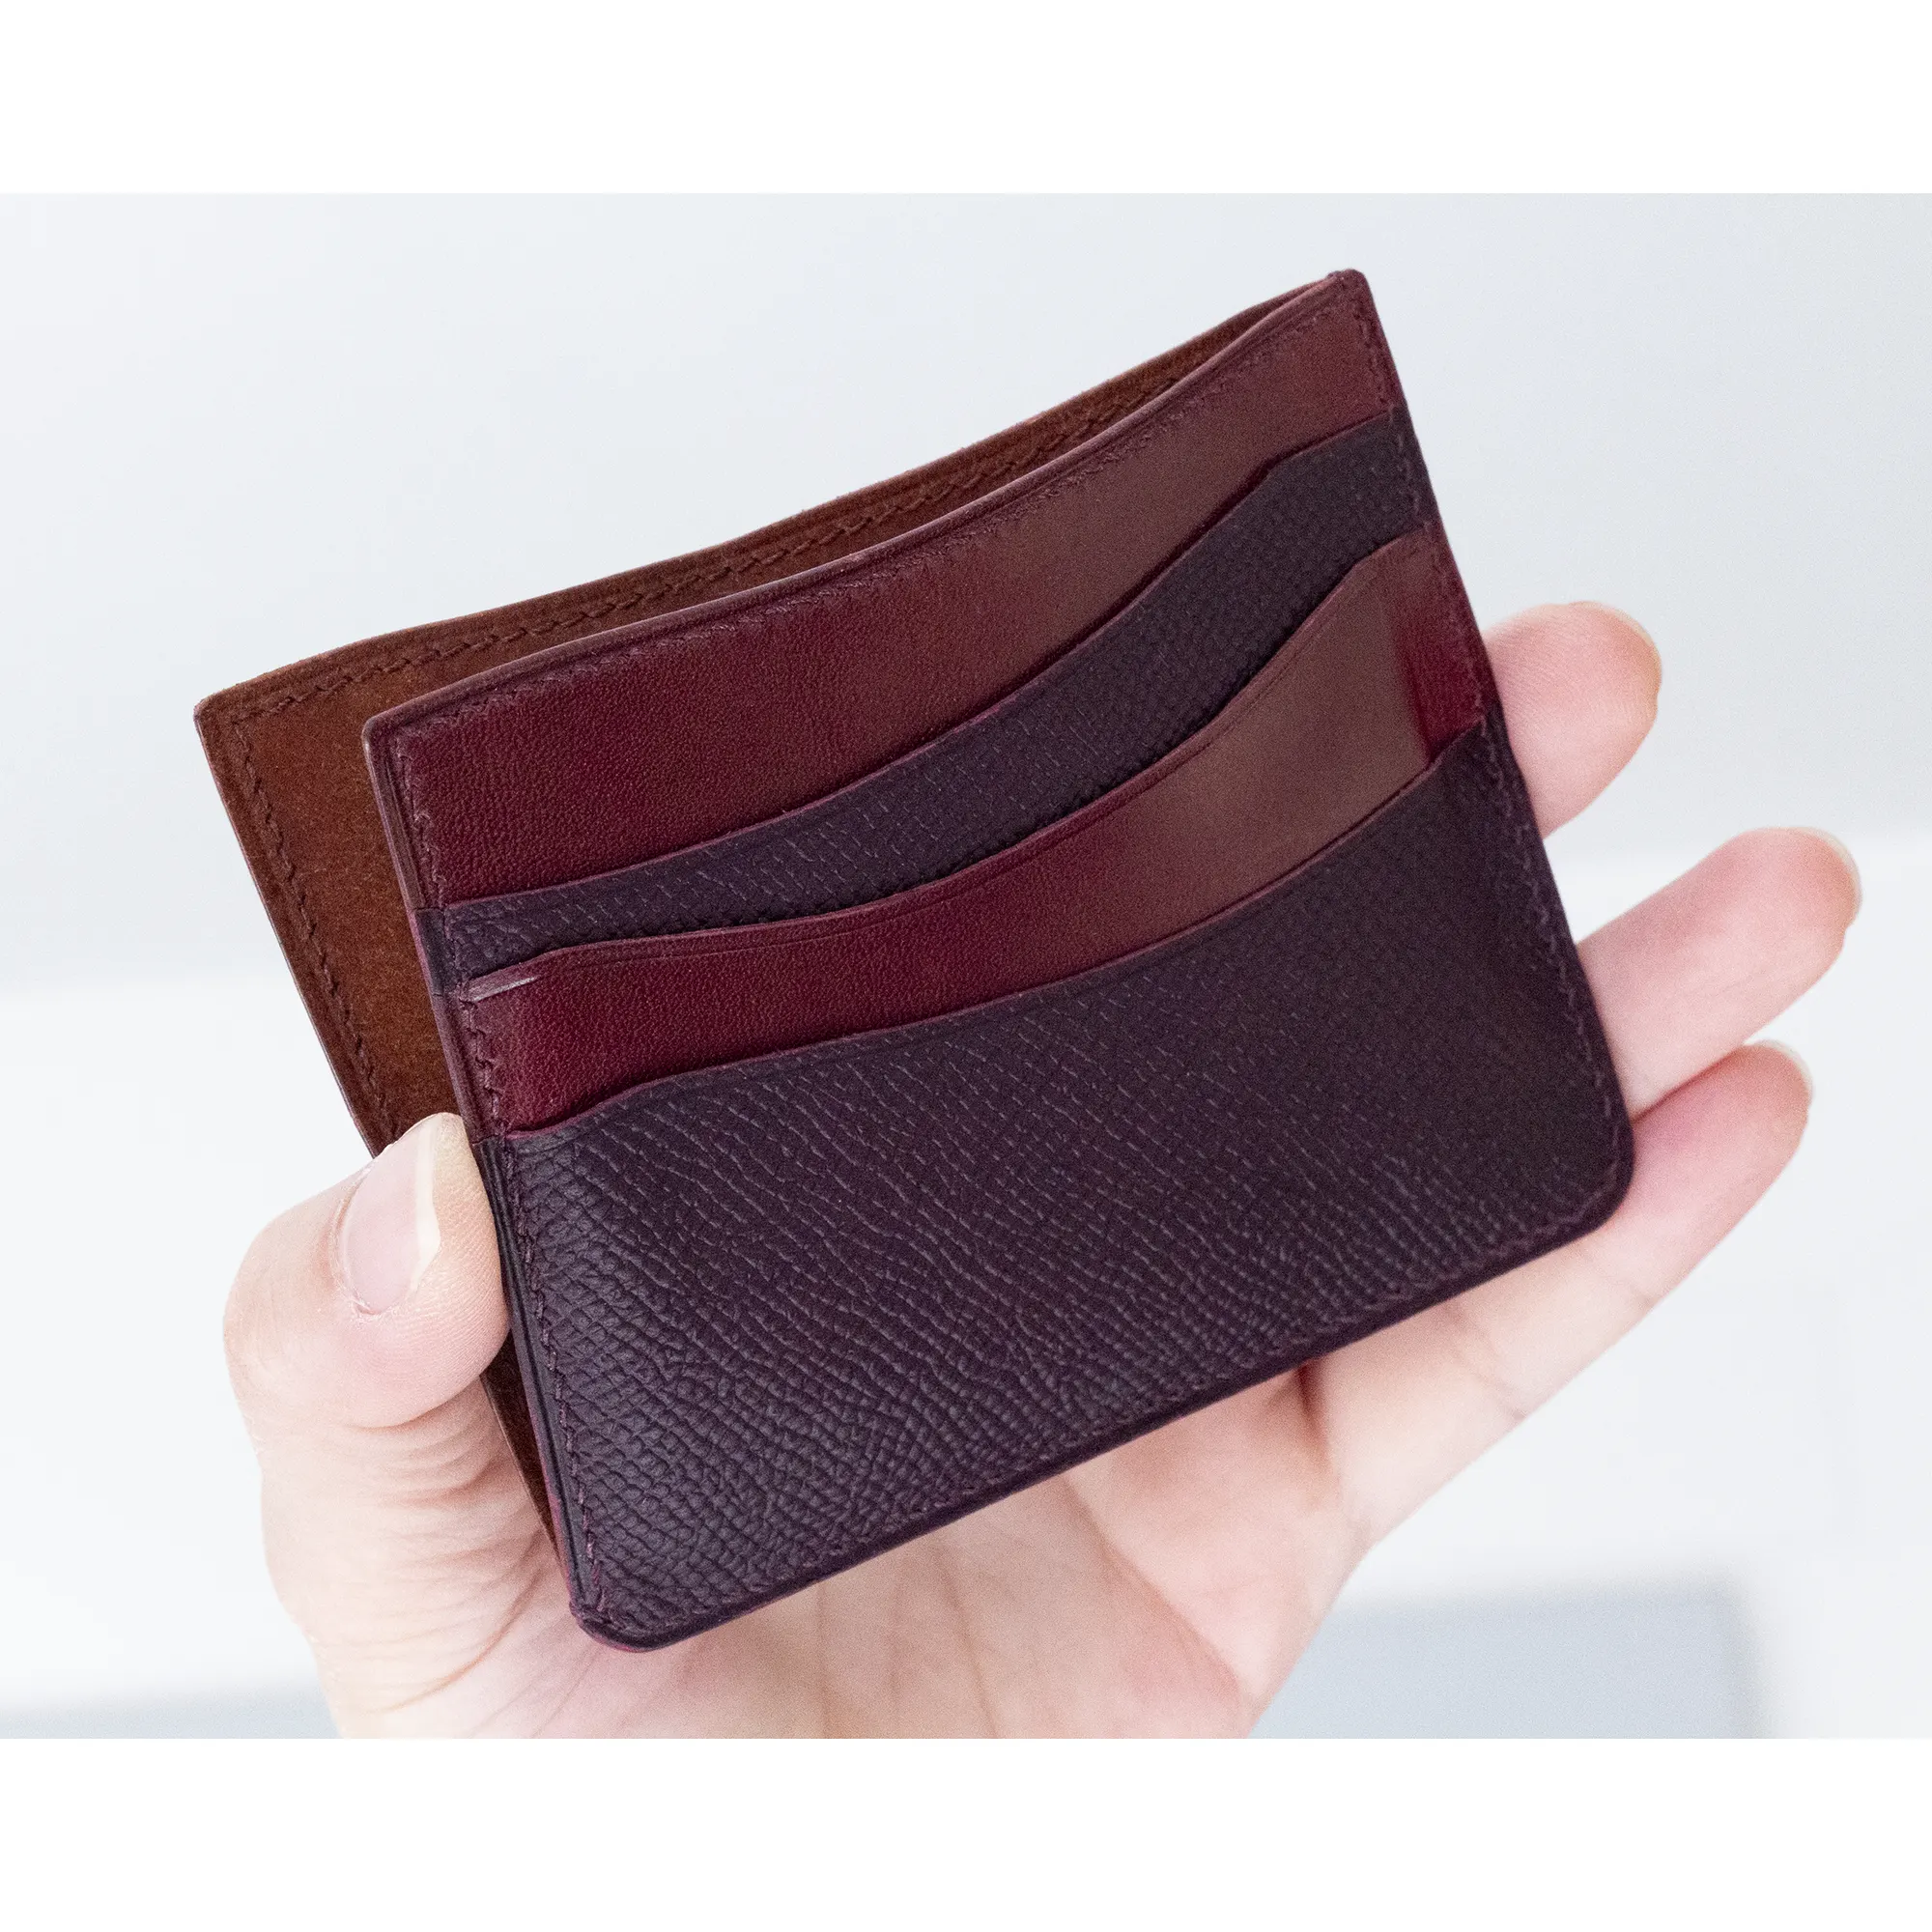 possala designs handmade leather card wallet in burgundy easy access design